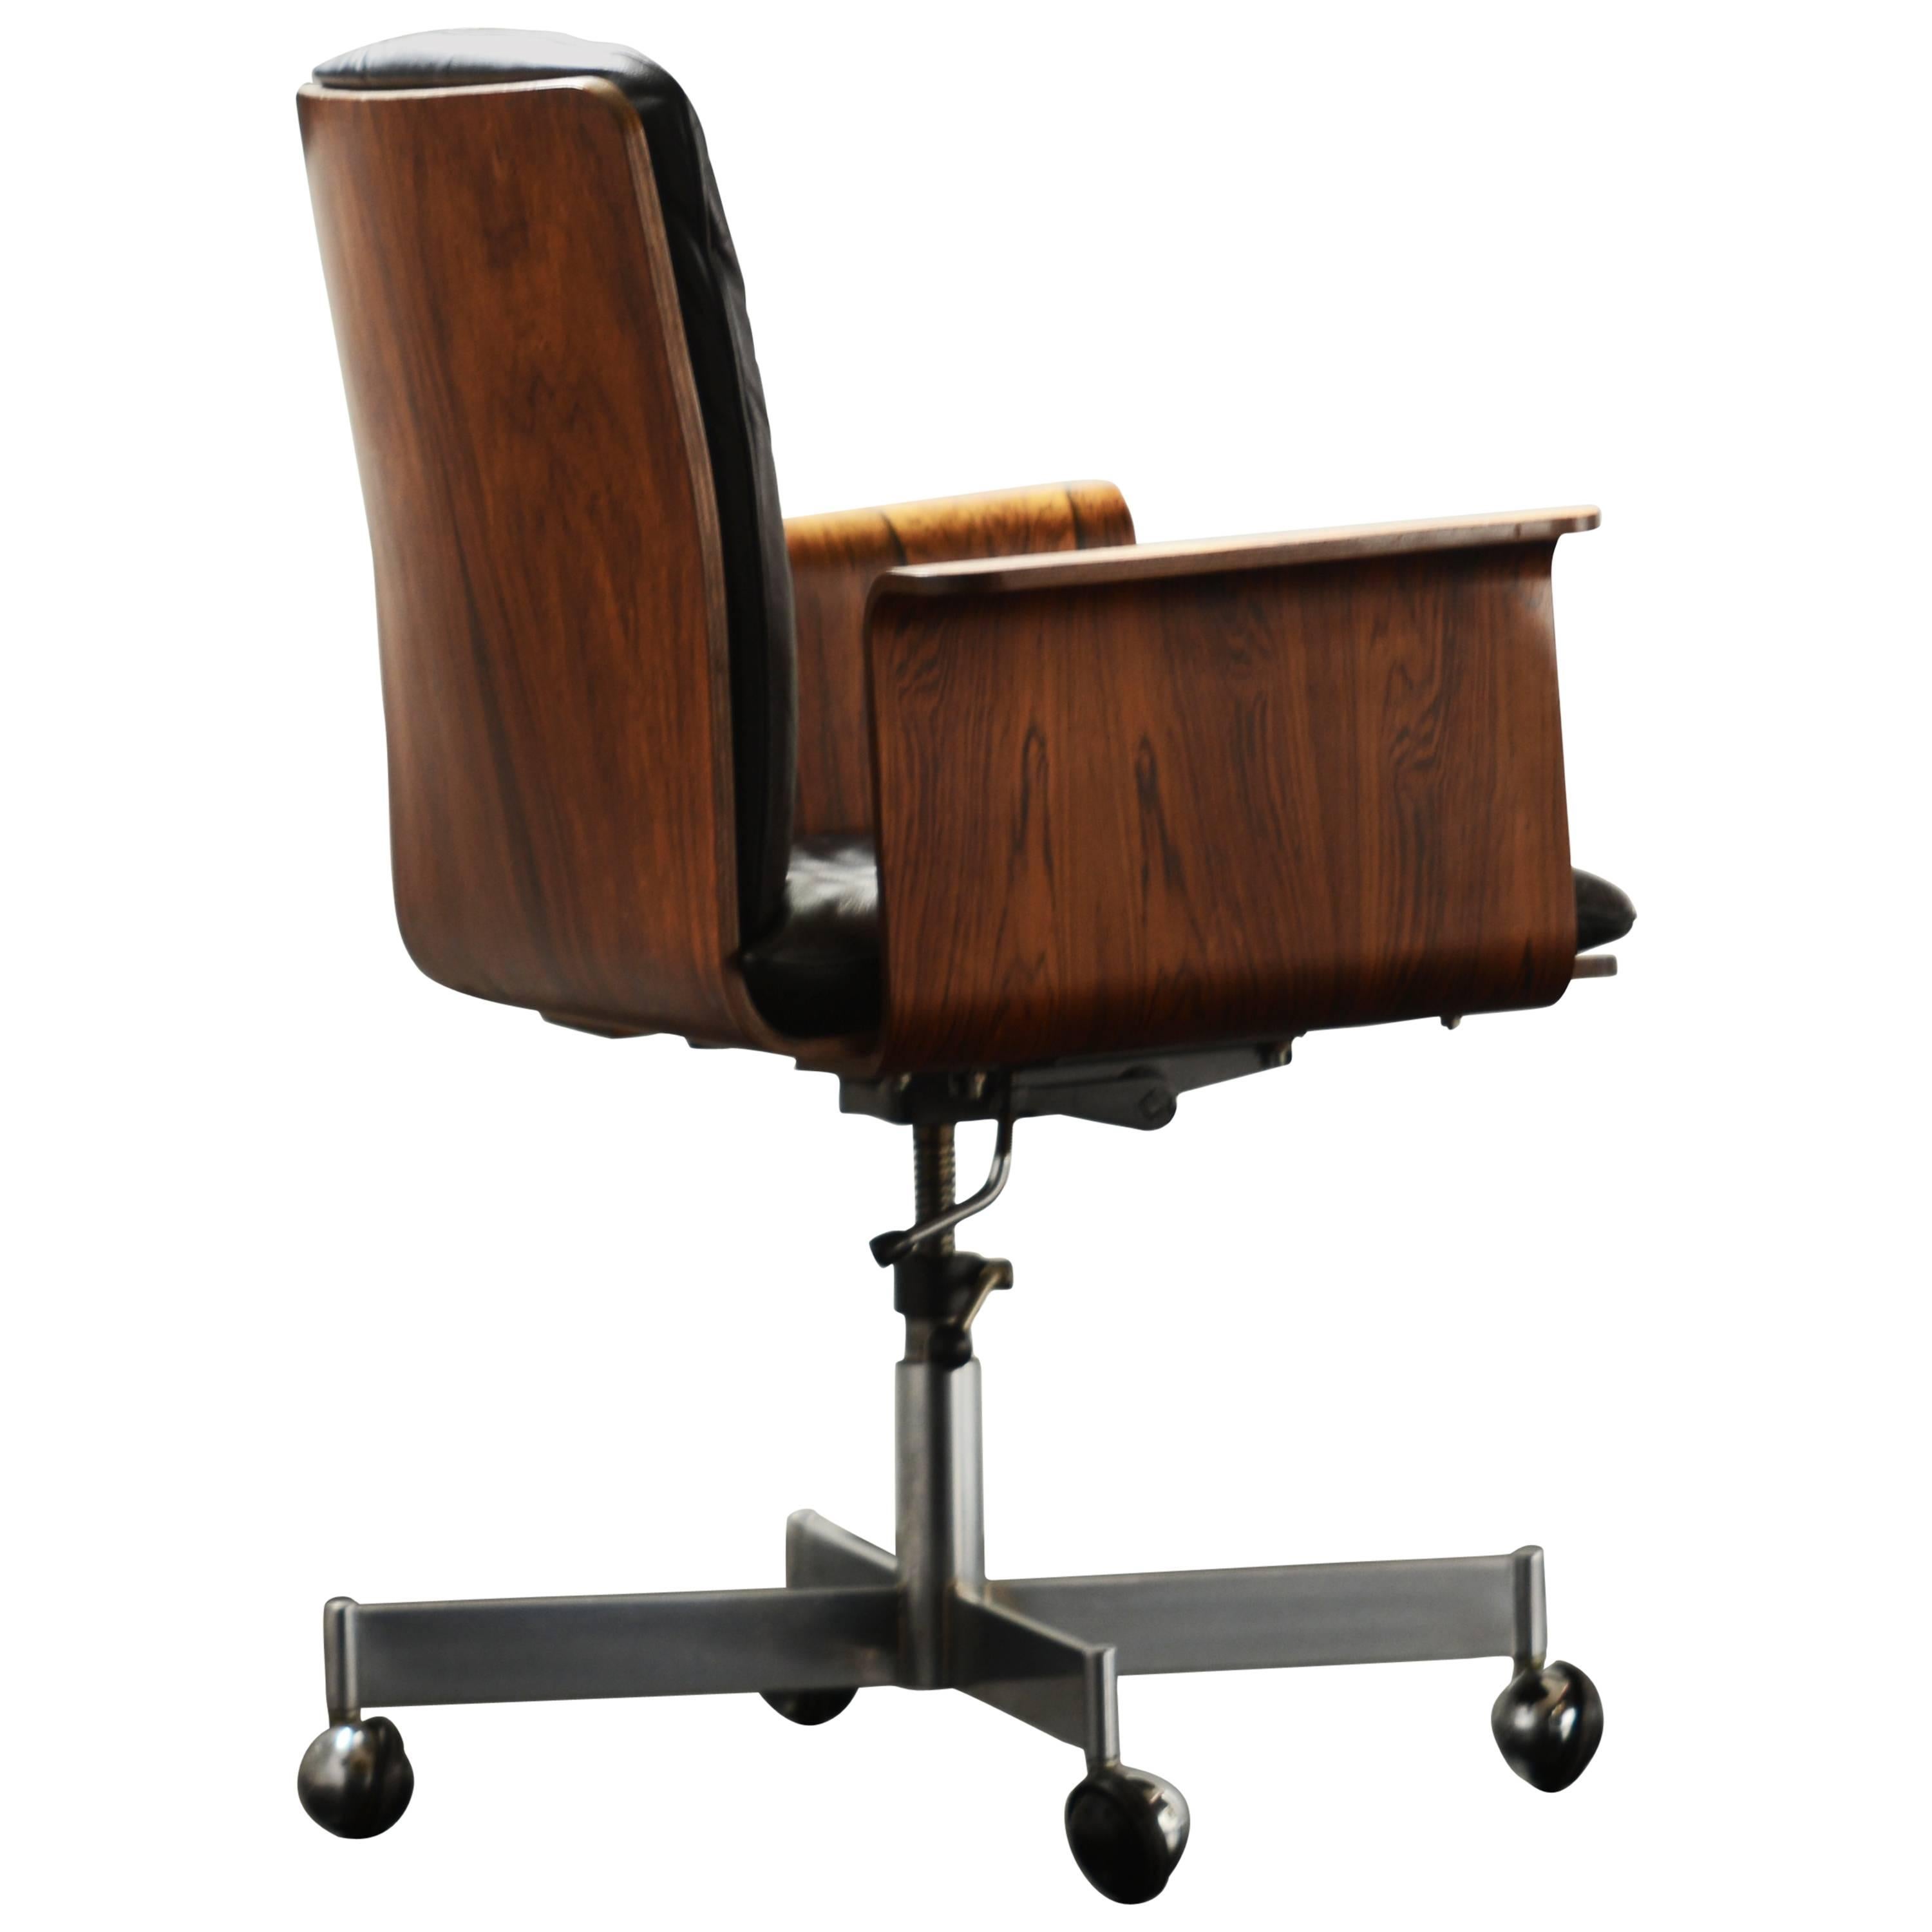 Jorgen Rasmussen Rosewood and Black Leather Desk or Office Chair, Denmark, 1960s